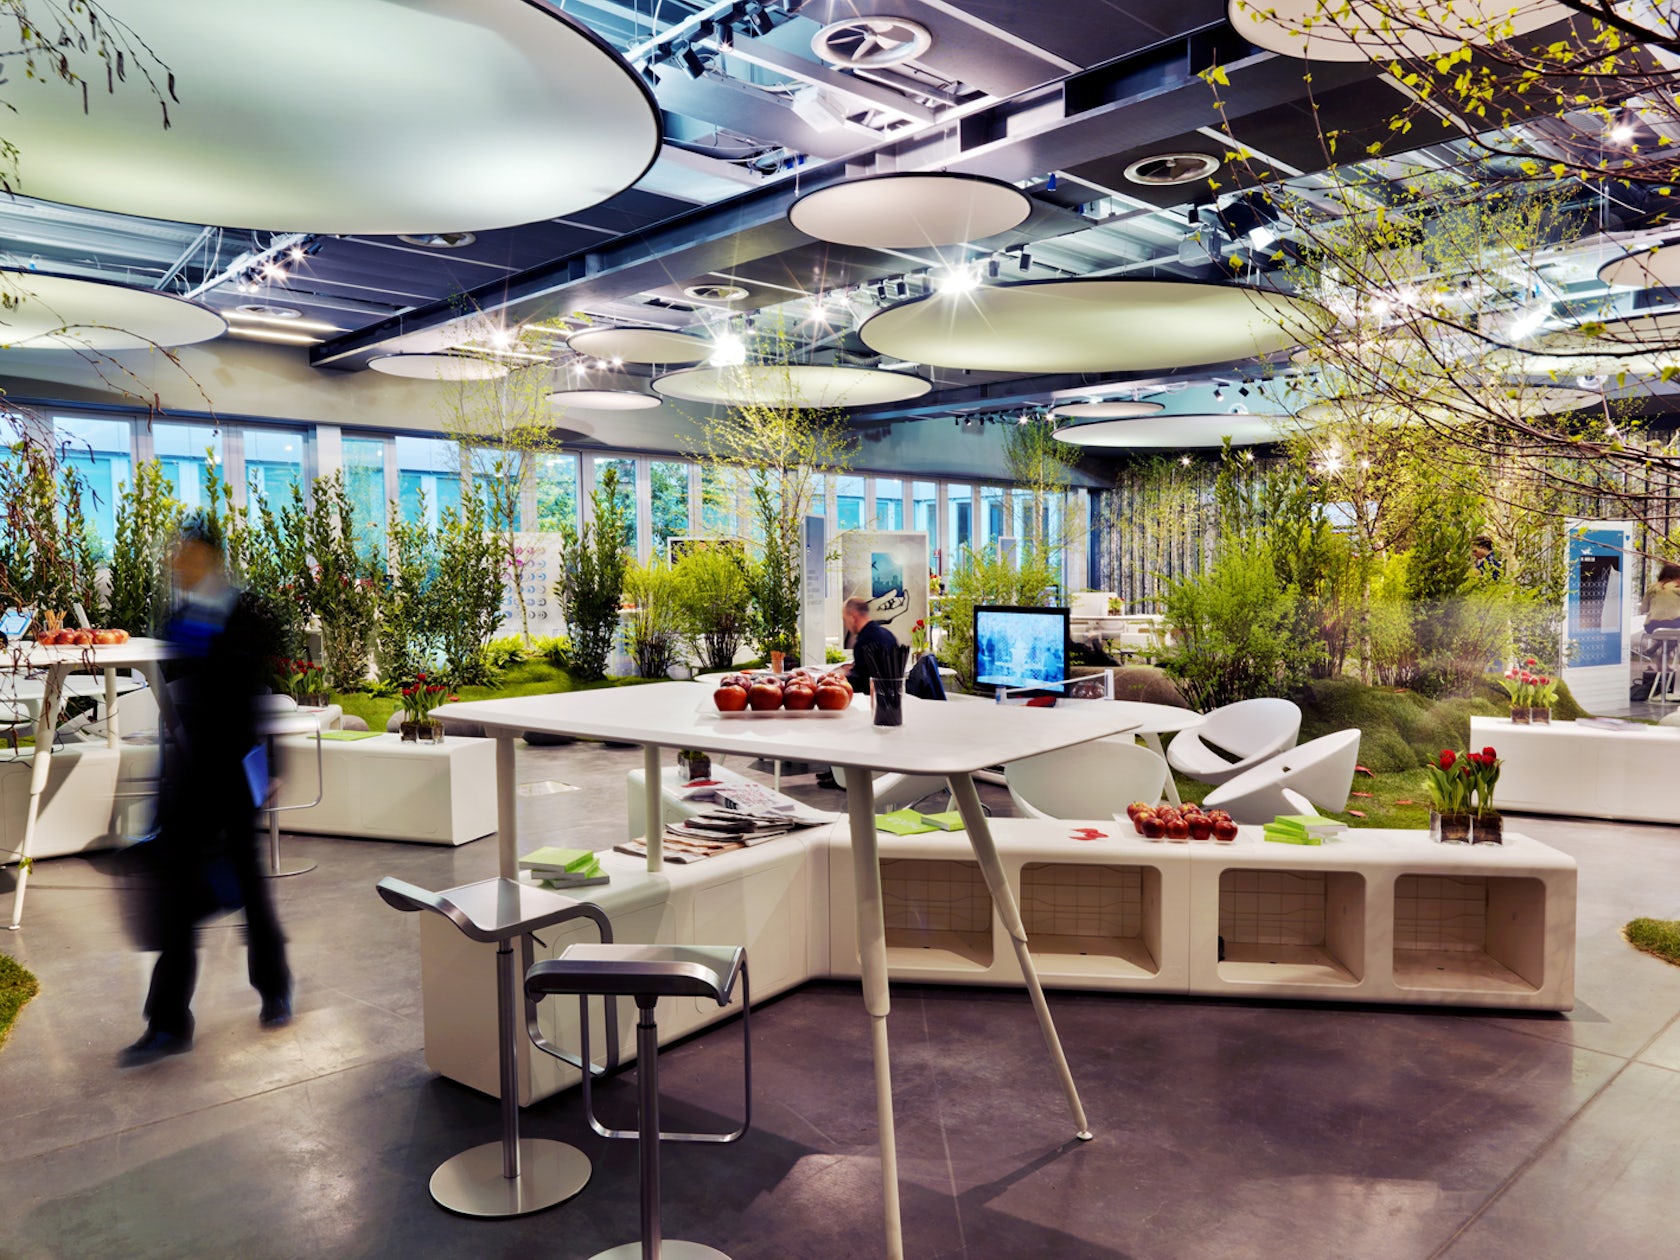 Thinkgarden: where doing business is natural by fabrizio pierandrei, stefano anfossi - Architizer